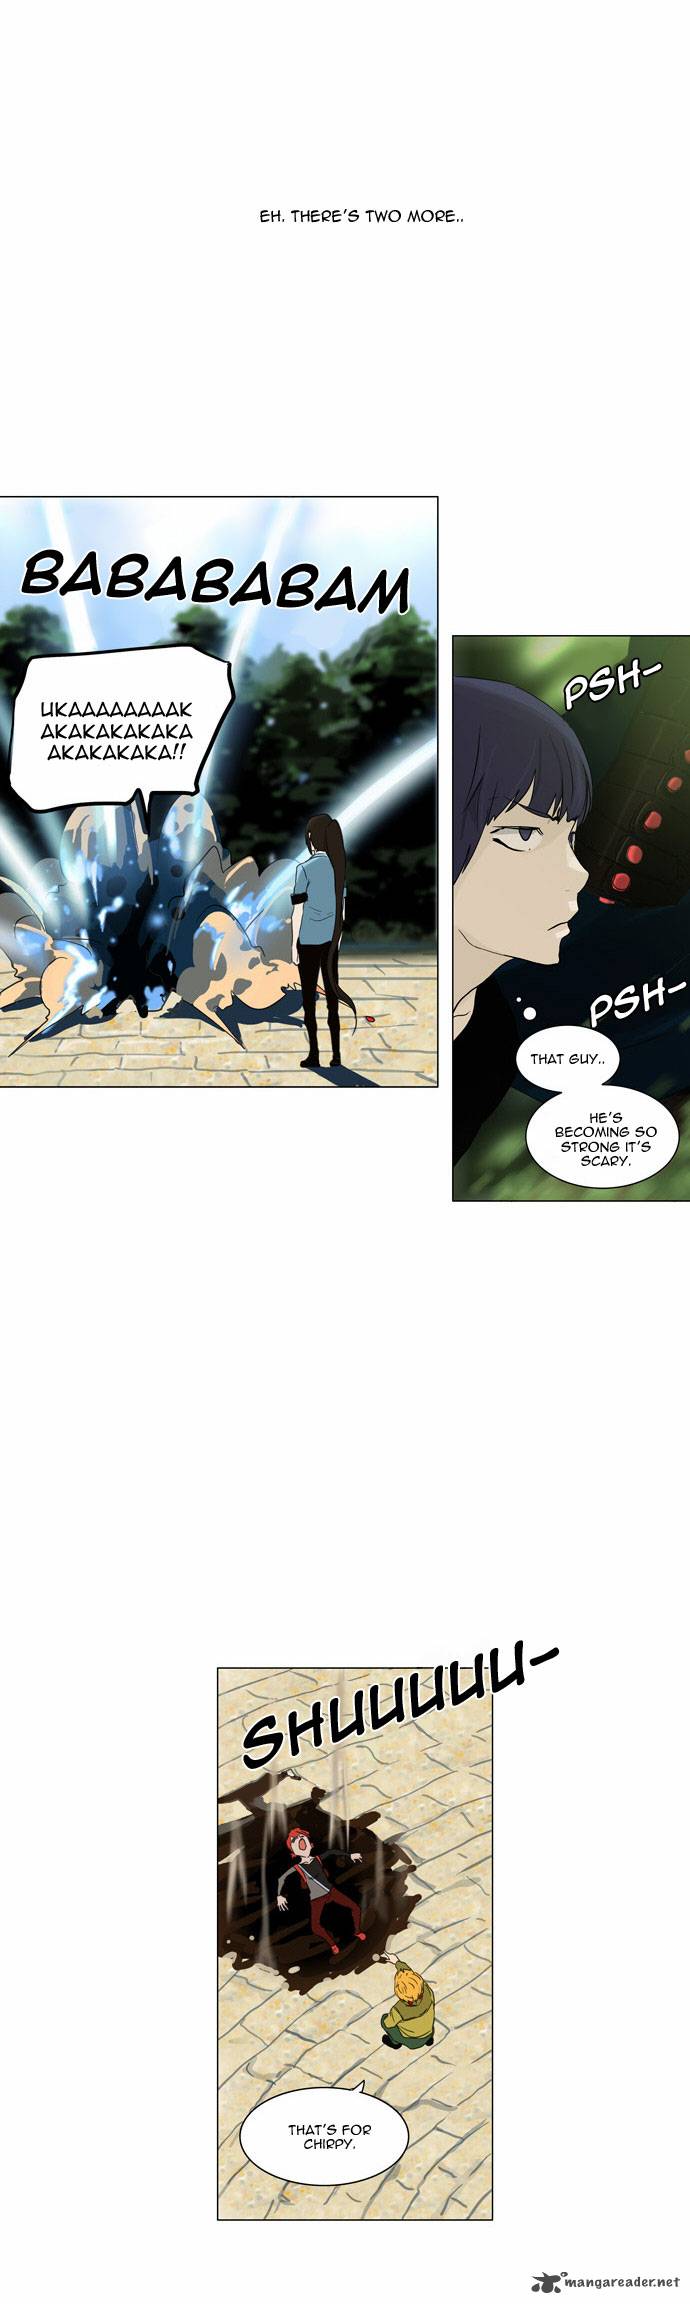 Tower Of God 120 26